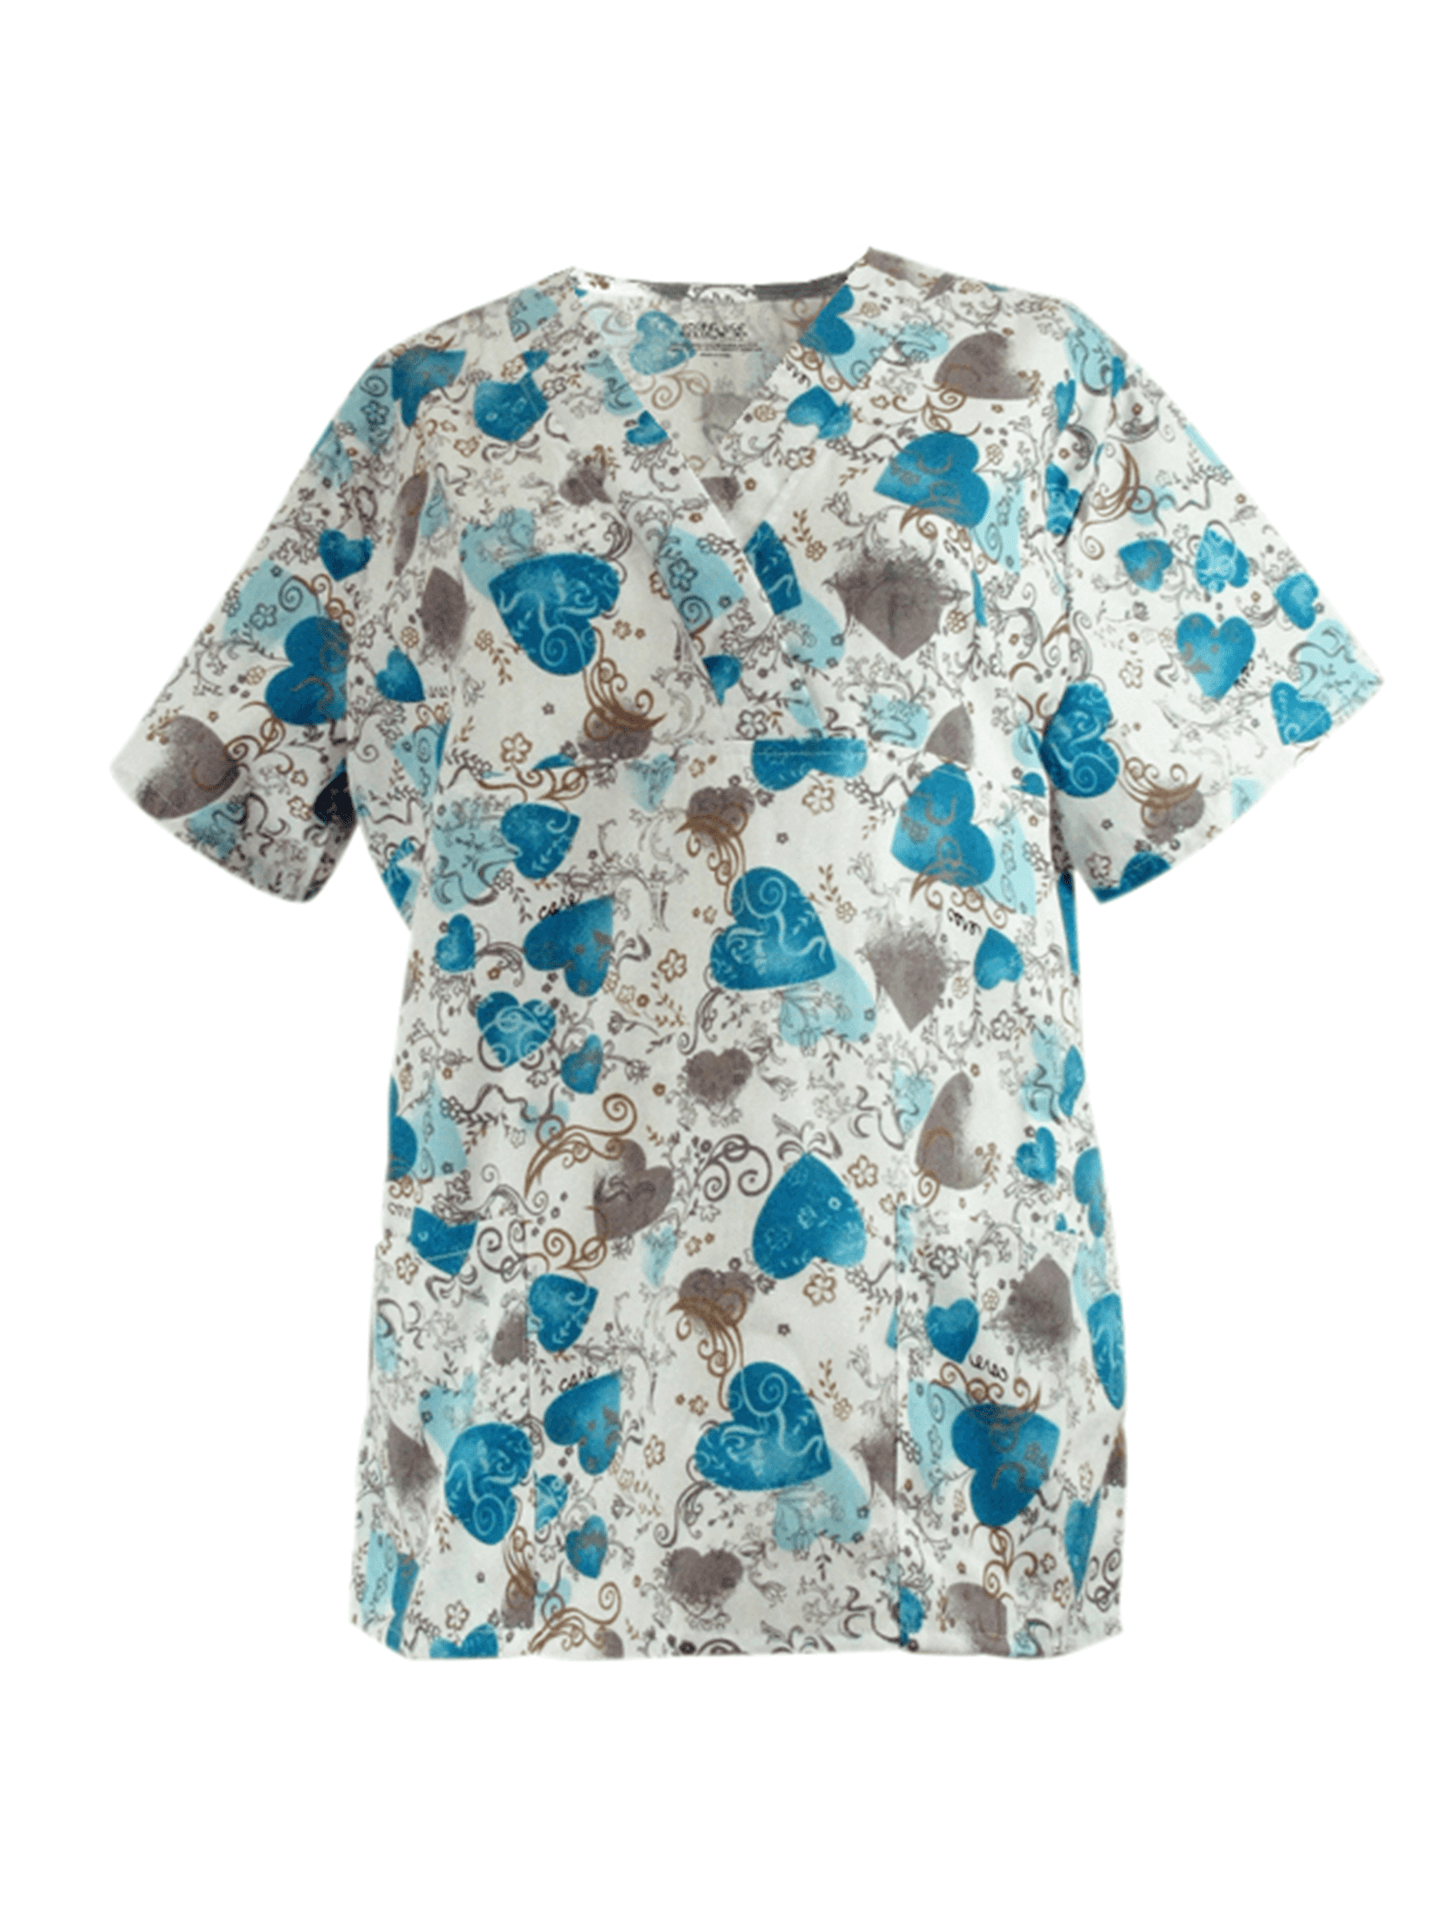 Young USA Ladies Scrub Top with Blue Hearts